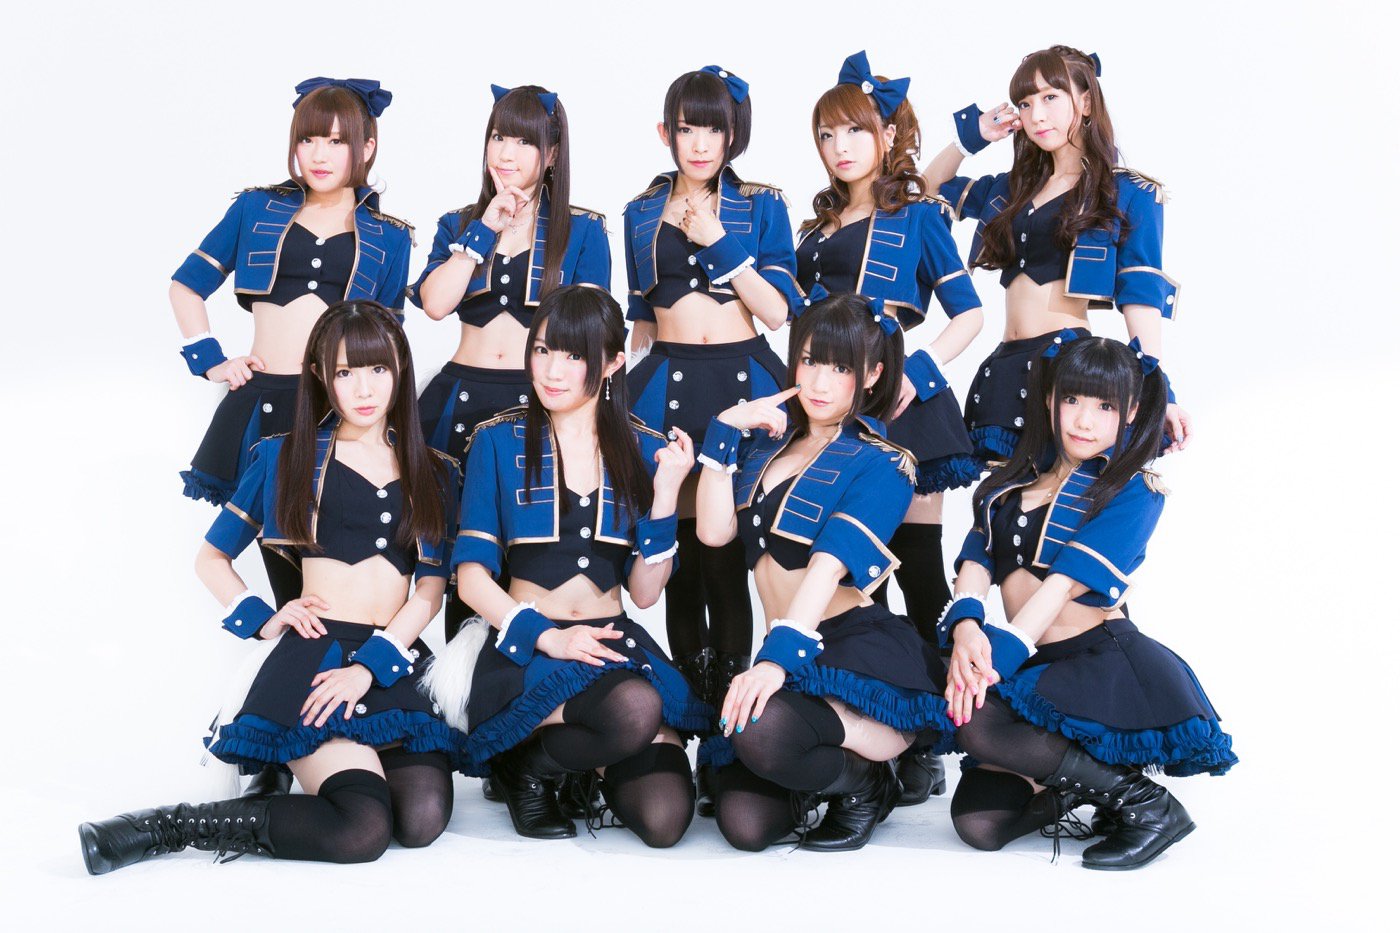 Afilia Saga Reveals MV for “Never Say Never” on New Years Day